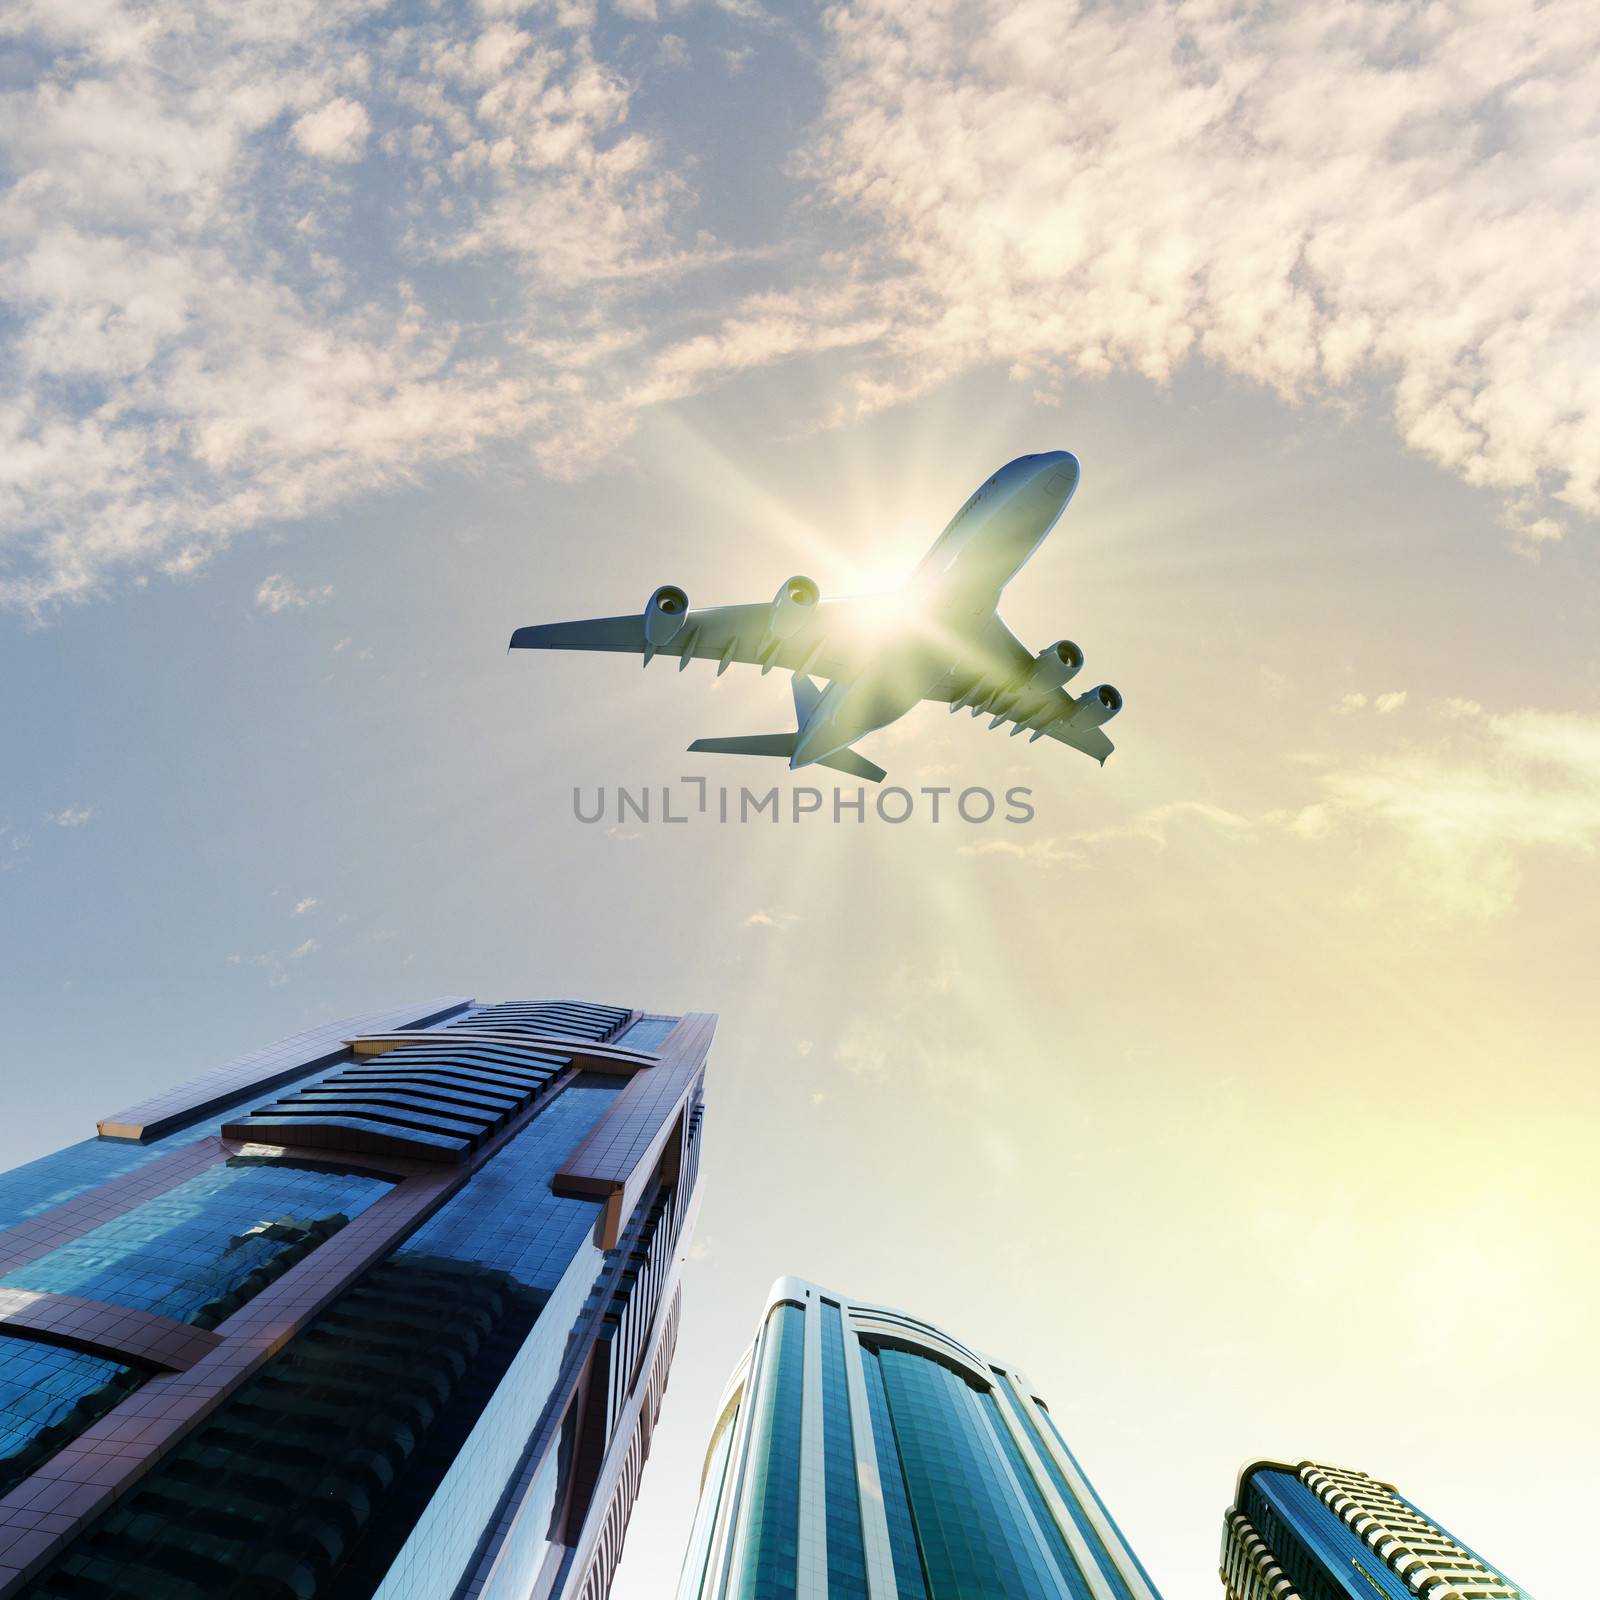 Image of airplane flying above skyscrapers. Bottom view